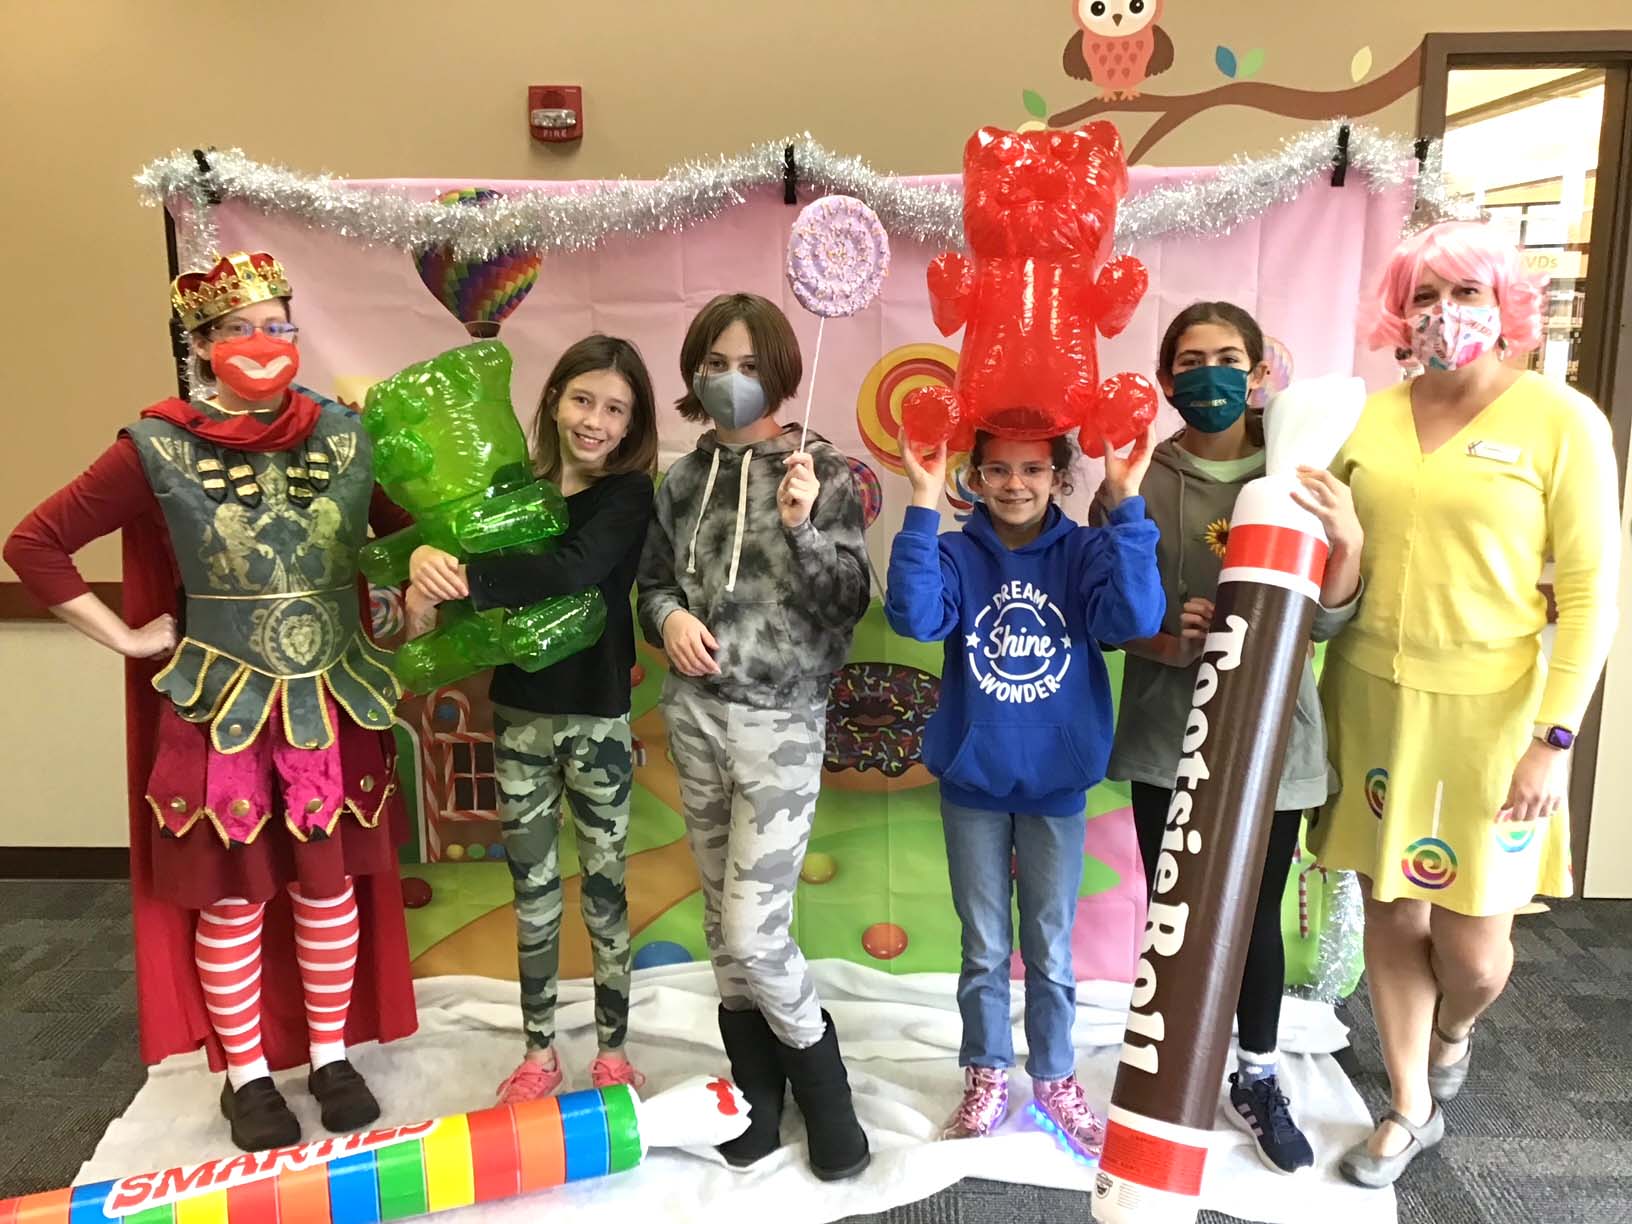 Image of candyland participants.